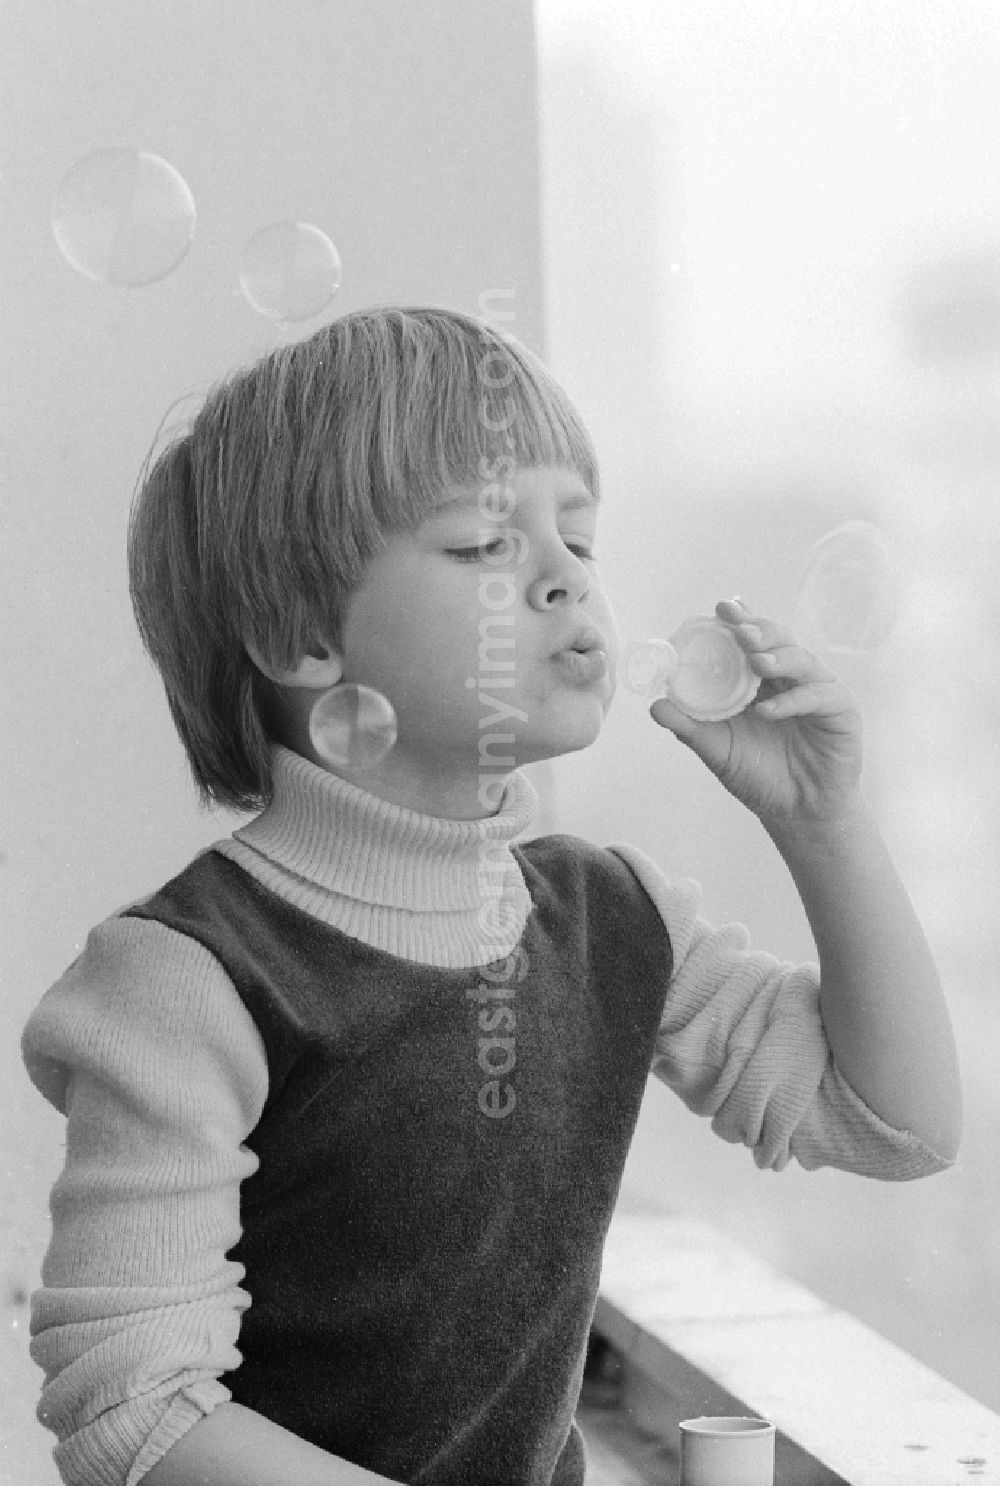 GDR picture archive: Berlin - Boy making soap bubbles on a balcony in Berlin, the former capital of the GDR, the German Democratic Republic